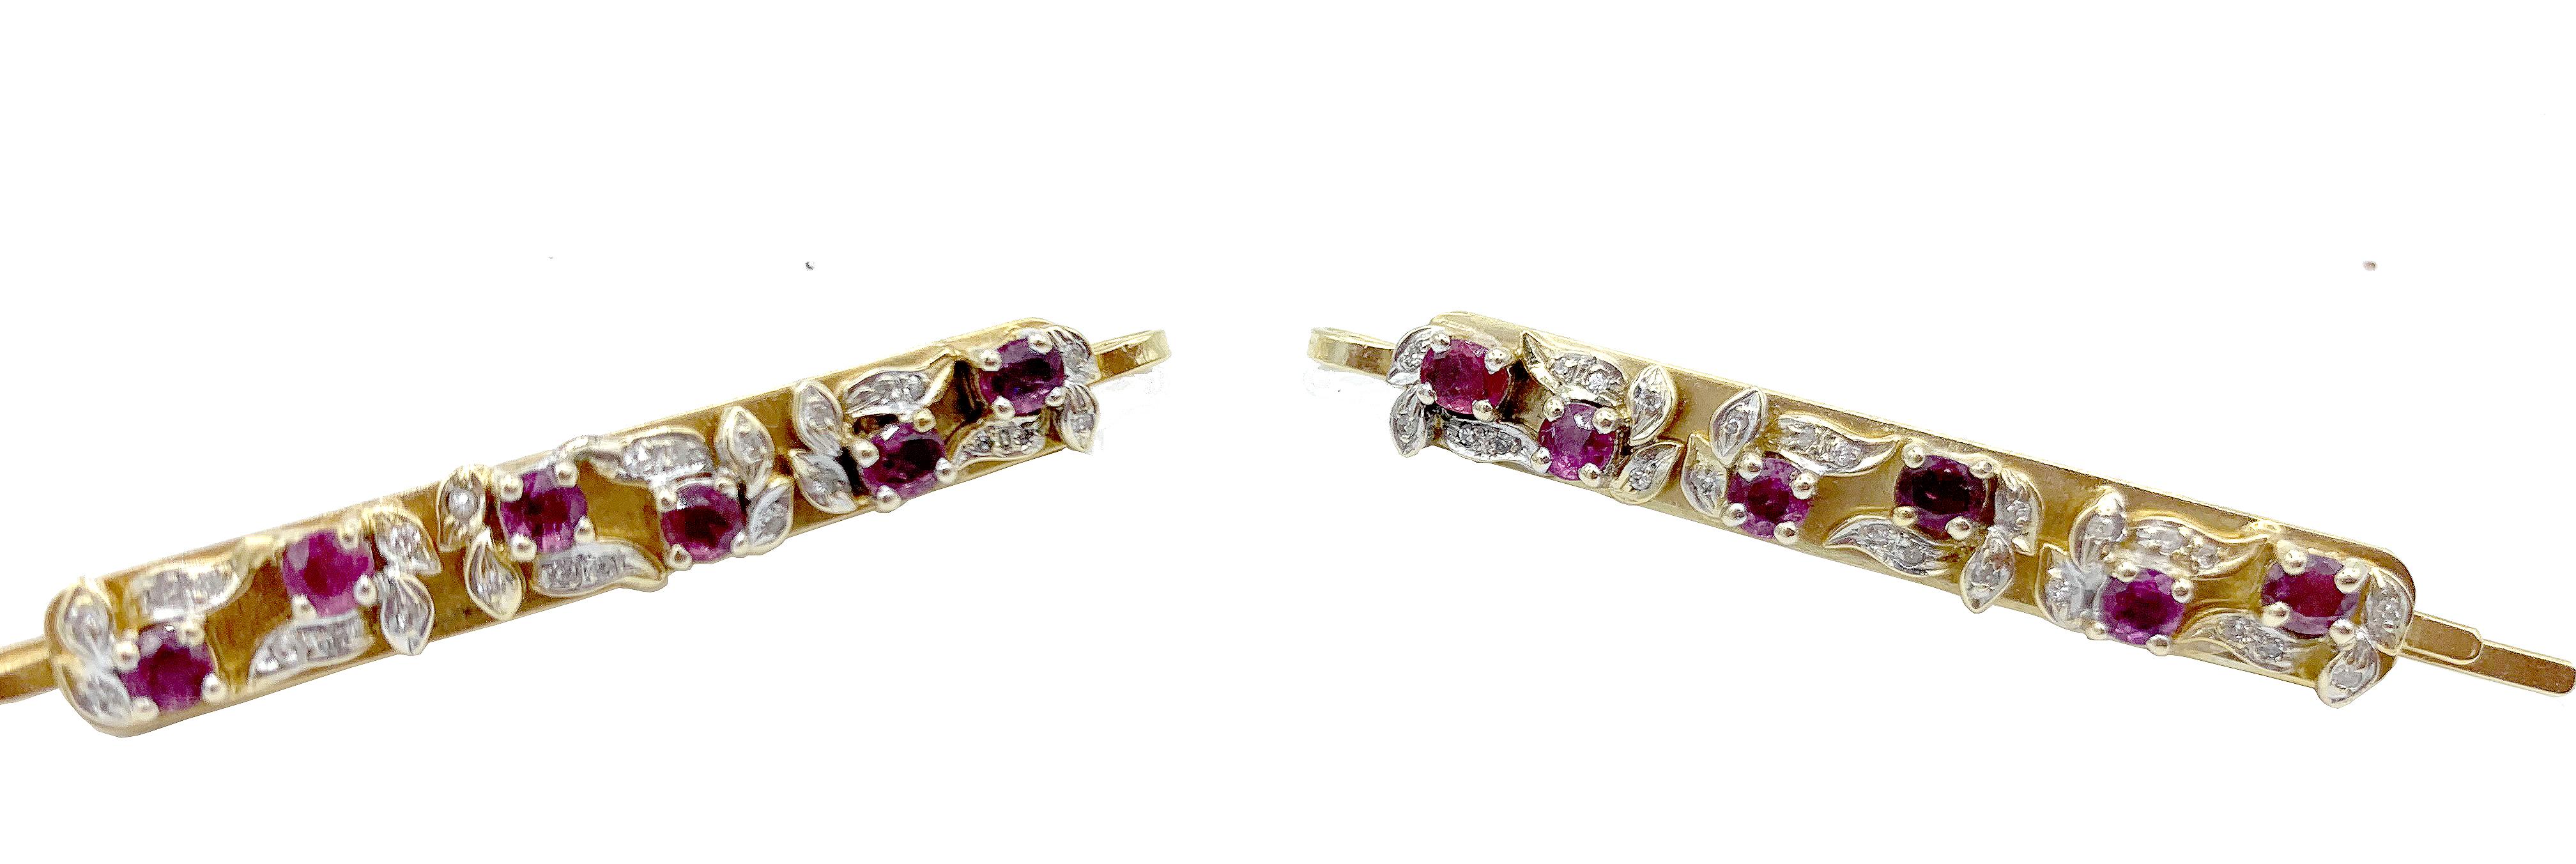 A beautiful, female hair pin set, in 14kt yellow gold with beautiful pave diamonds and rubies. Stamped 